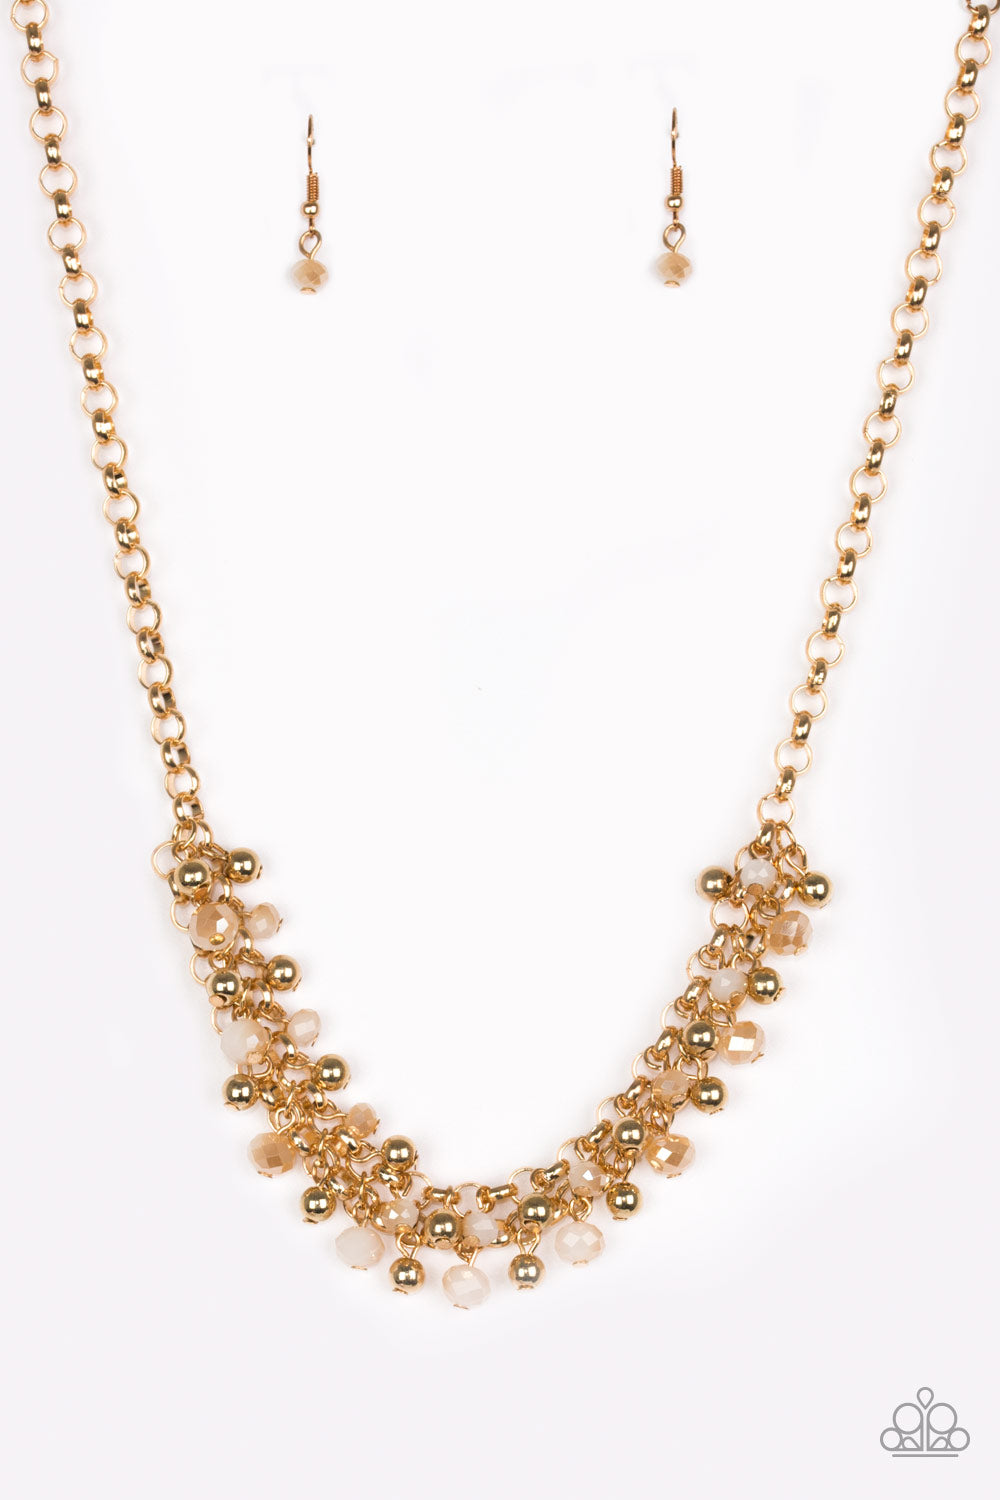 Paparazzi necklace - Trust Fund Baby - Gold